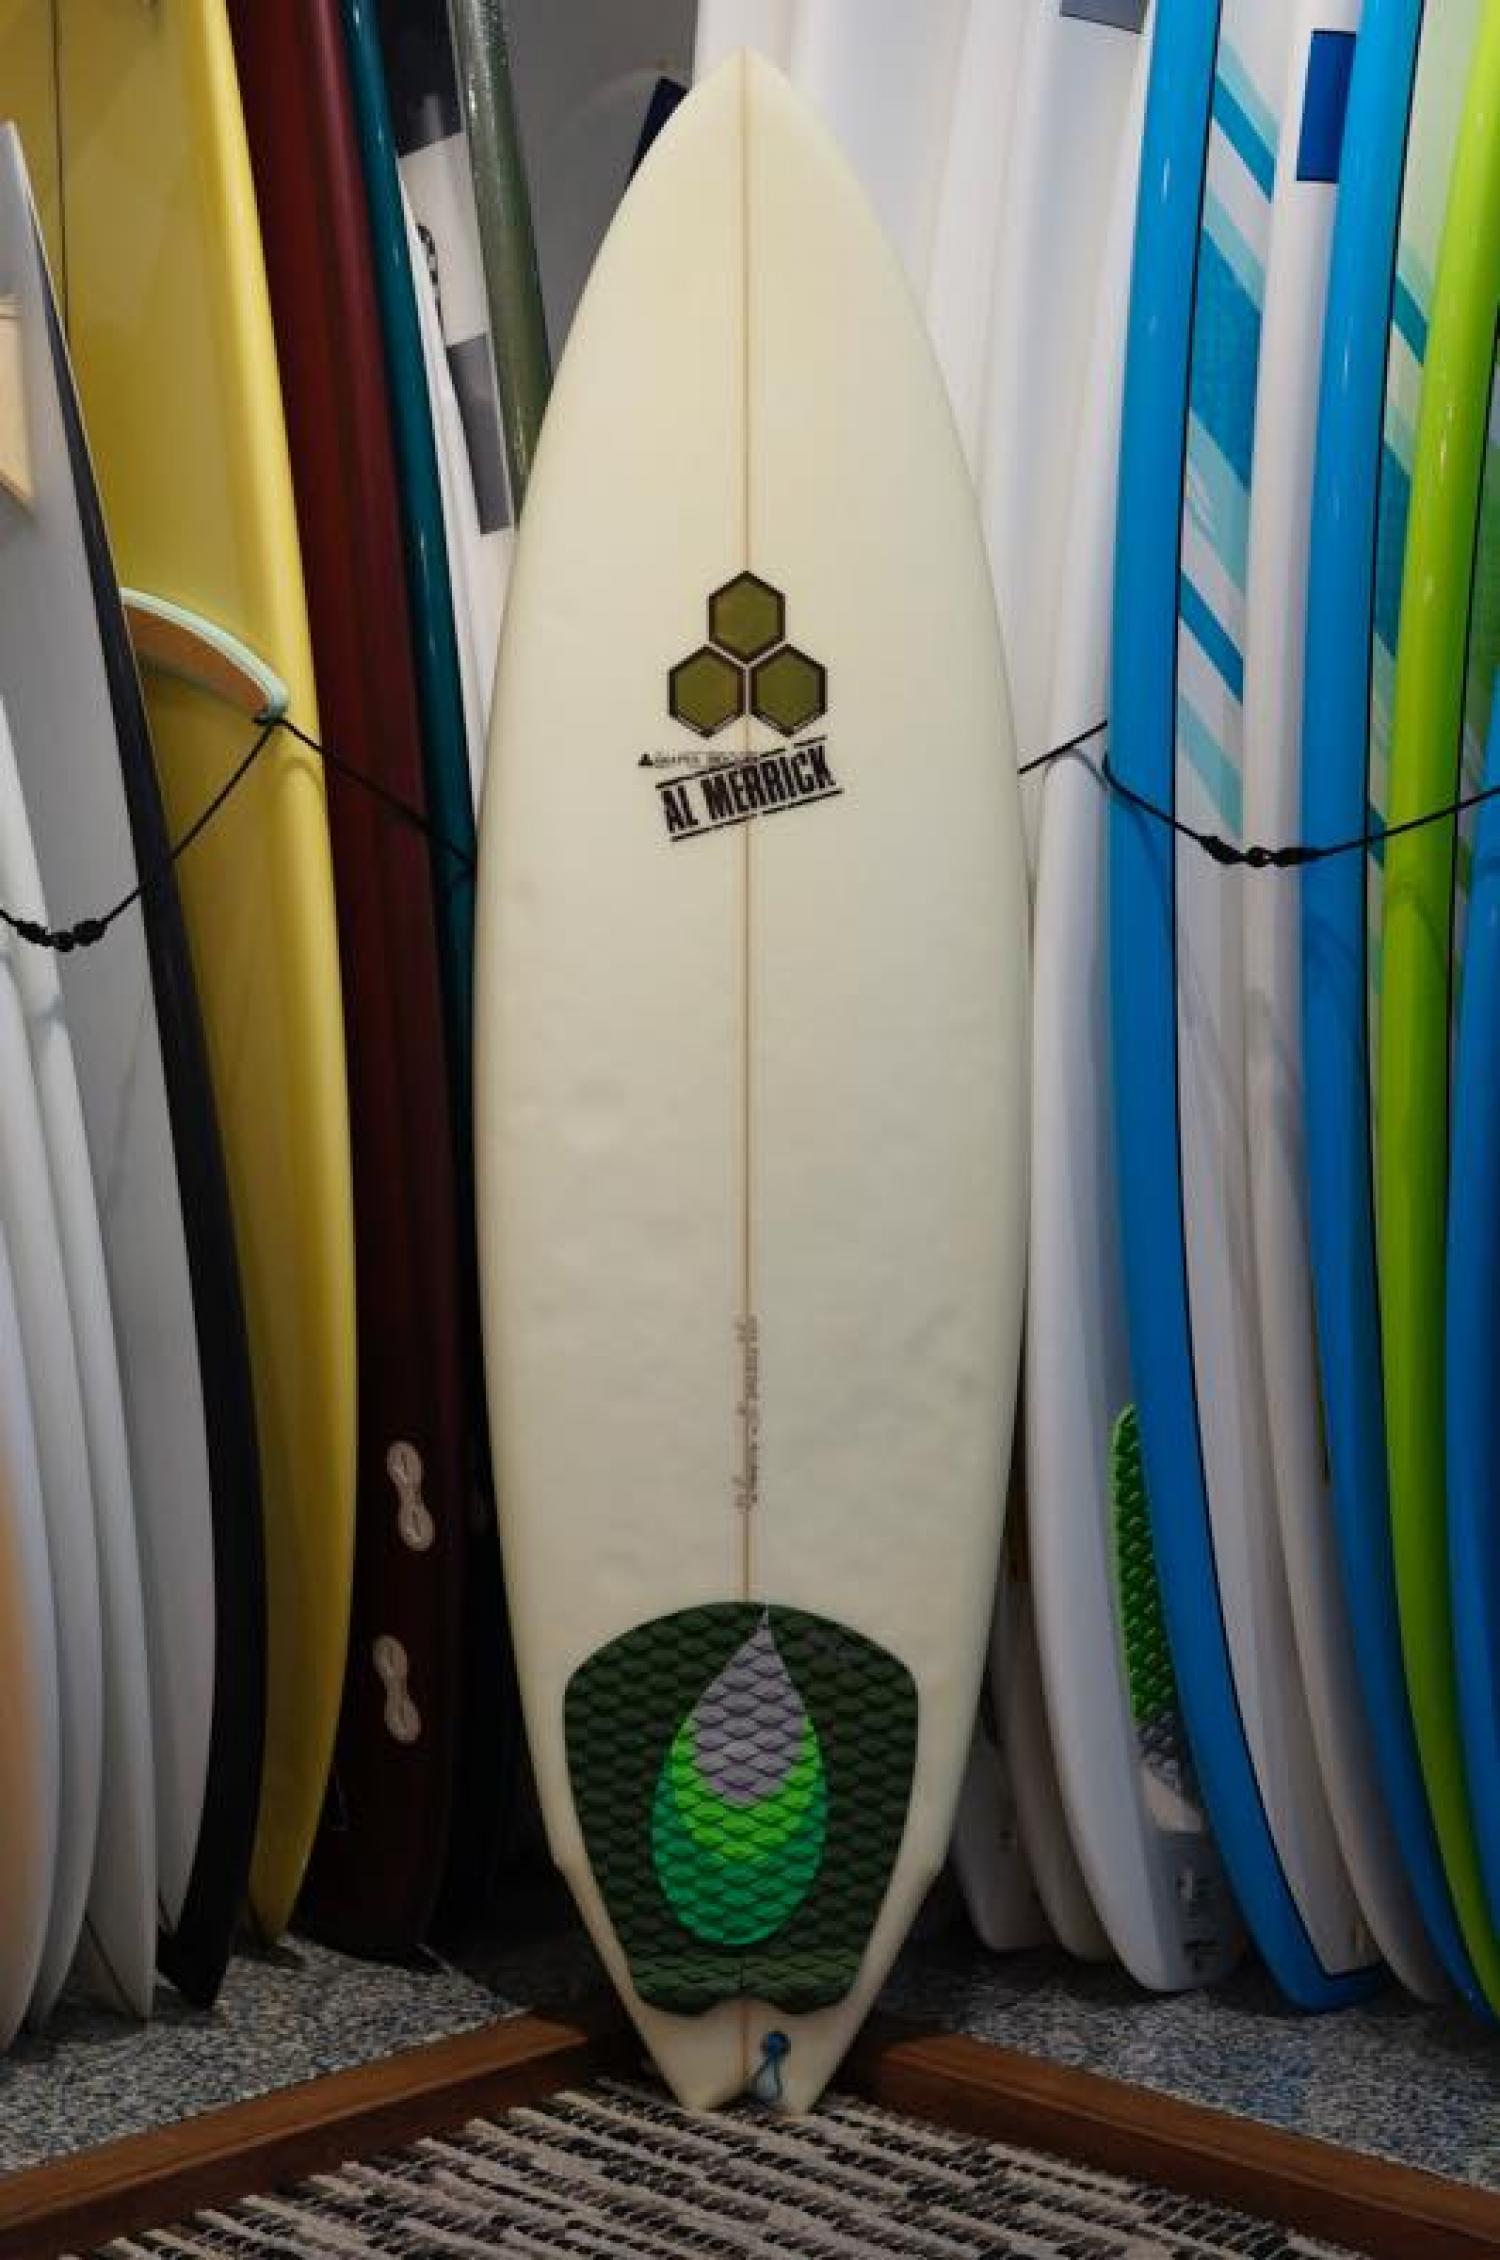 USED BOARDS 「Channel Islands Surfboards The Robber 5.9」